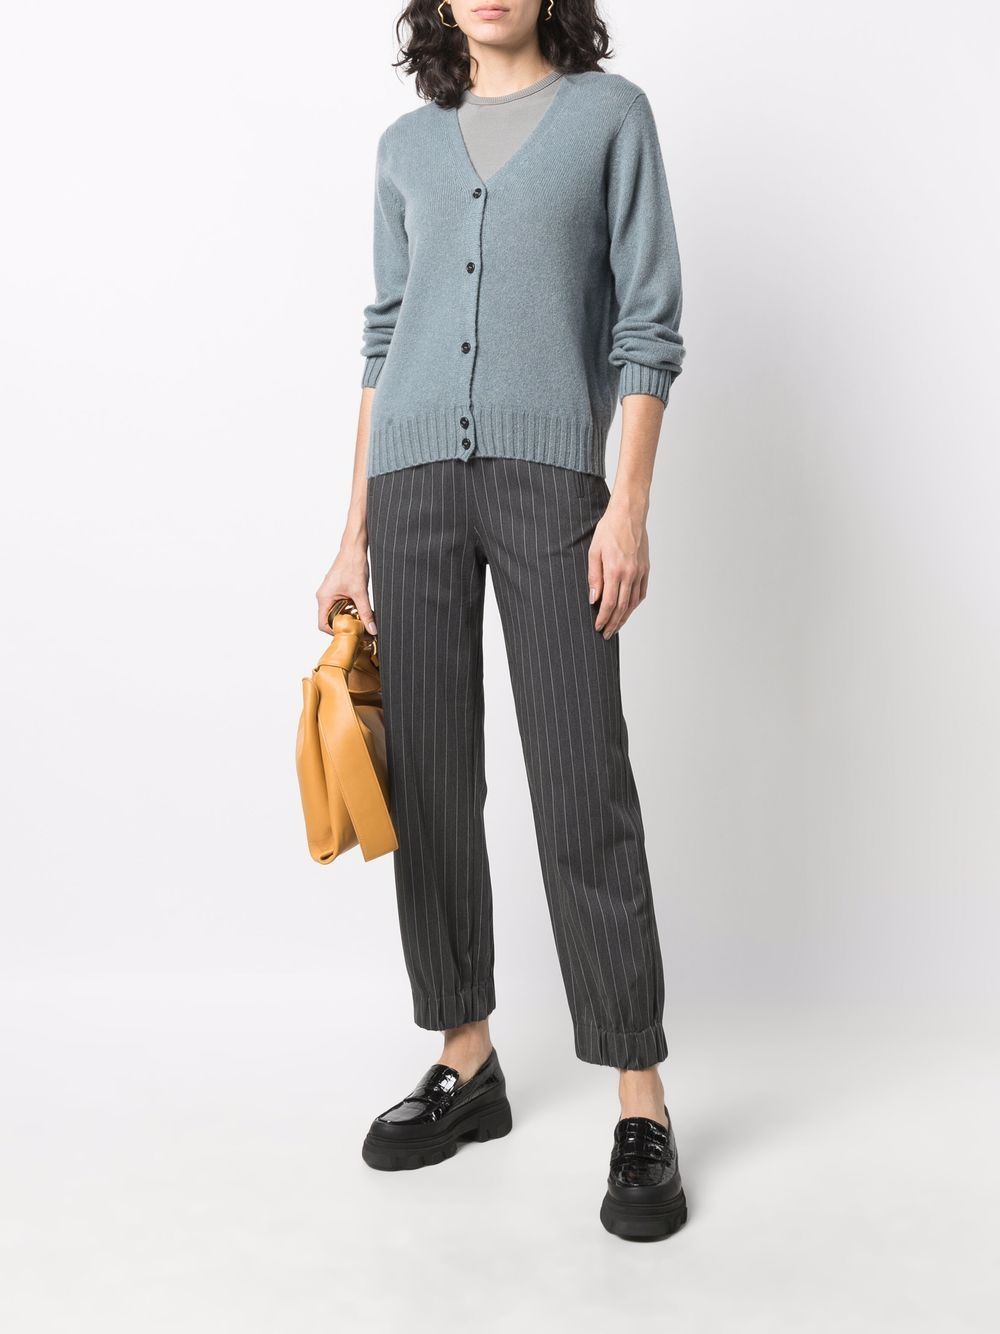 Margaret Howell button-up Cashmere Cardigan - Farfetch